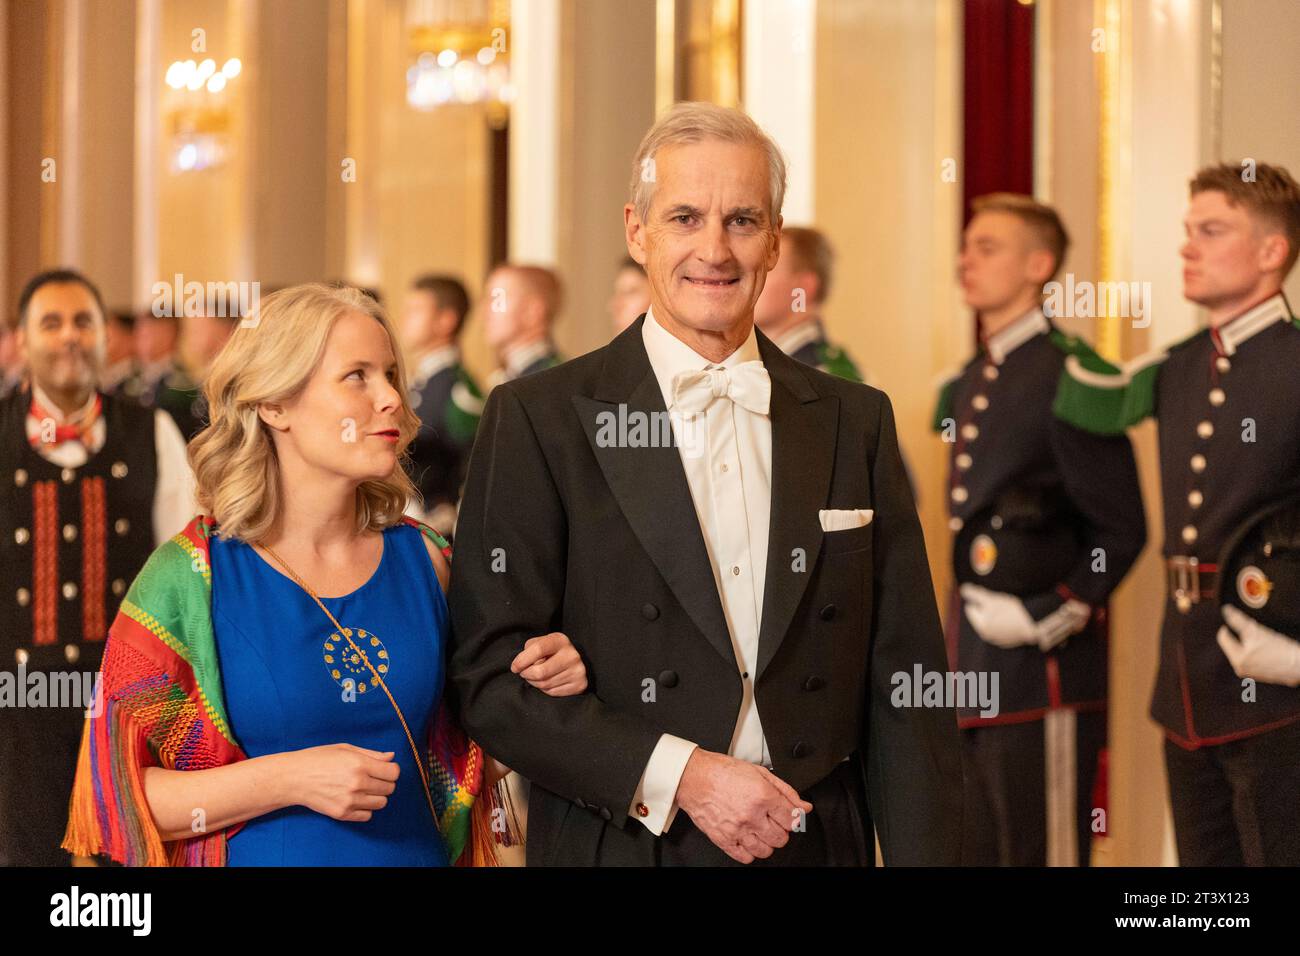 HM The King and Queen photographed with the Nordic heads of state and  spouses in connection with the celebration of the King's 50th anniversary  on the throne. From L-R: Sauli Niinistö, President